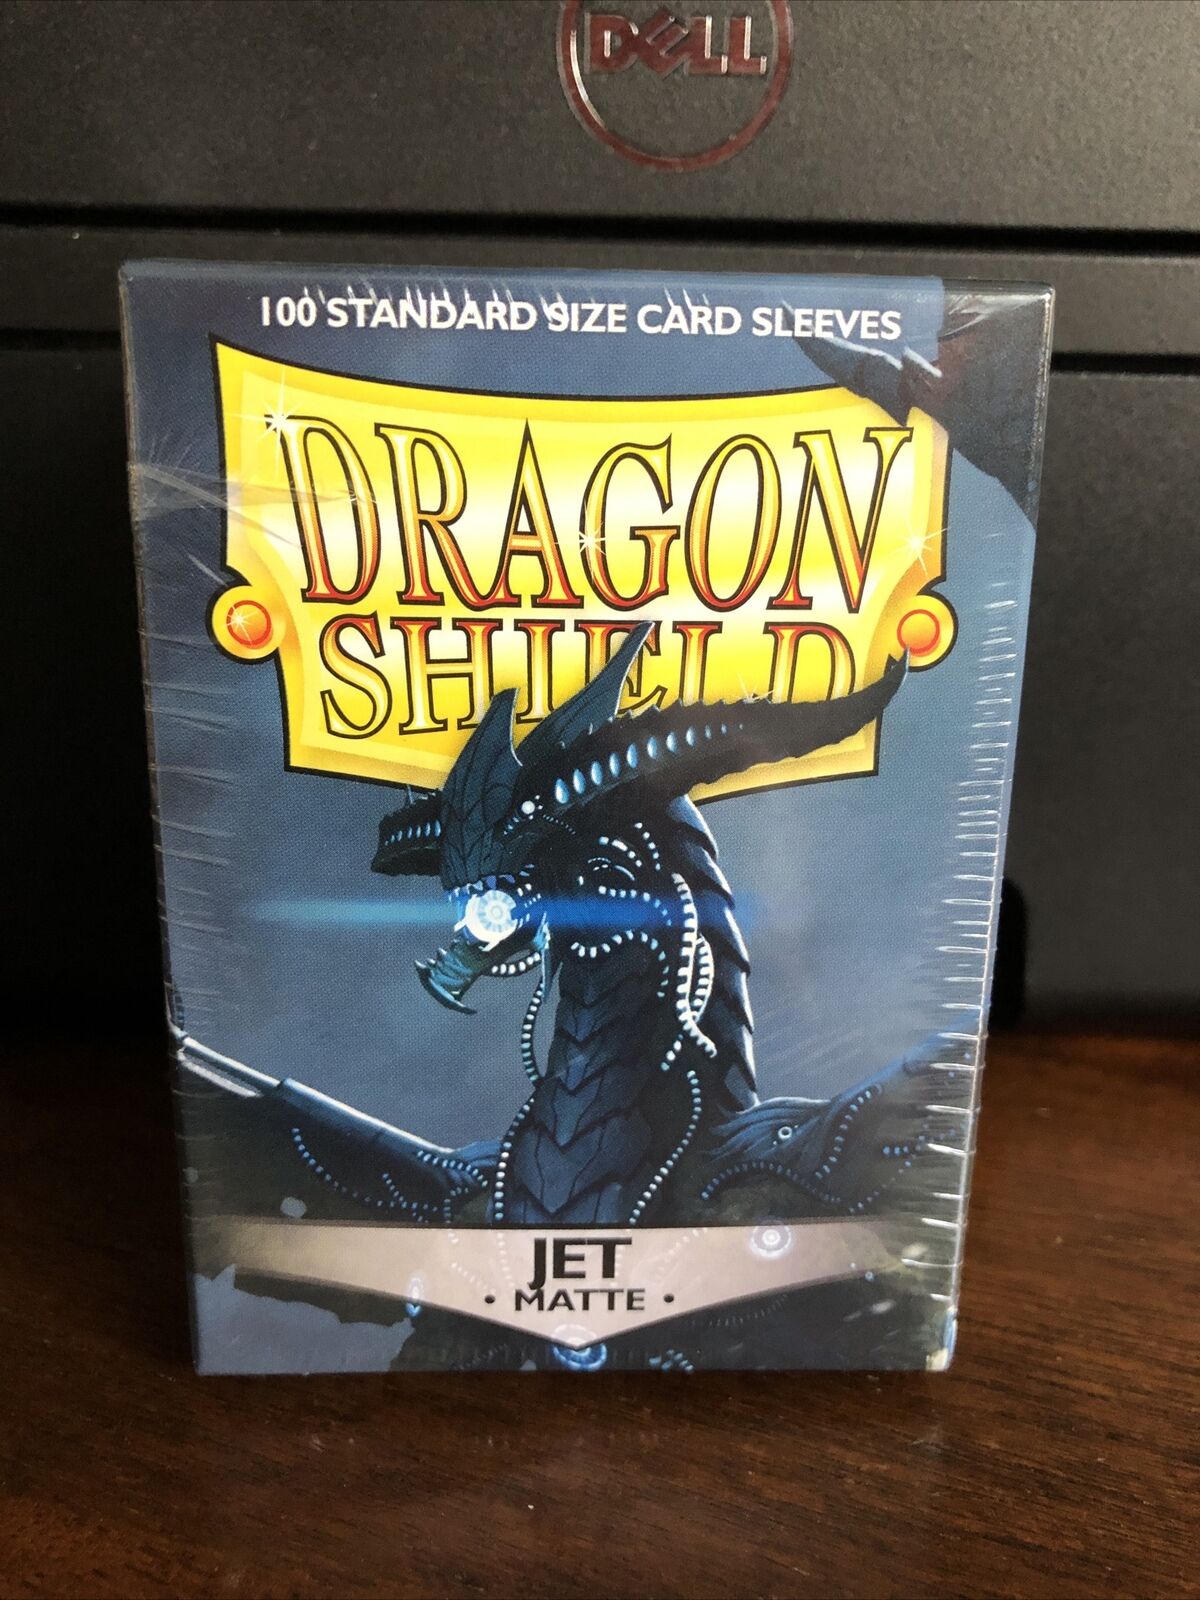 Dragon Shield Sleeves Pack of 100 Standard Size Card Sleeves Jet Matte